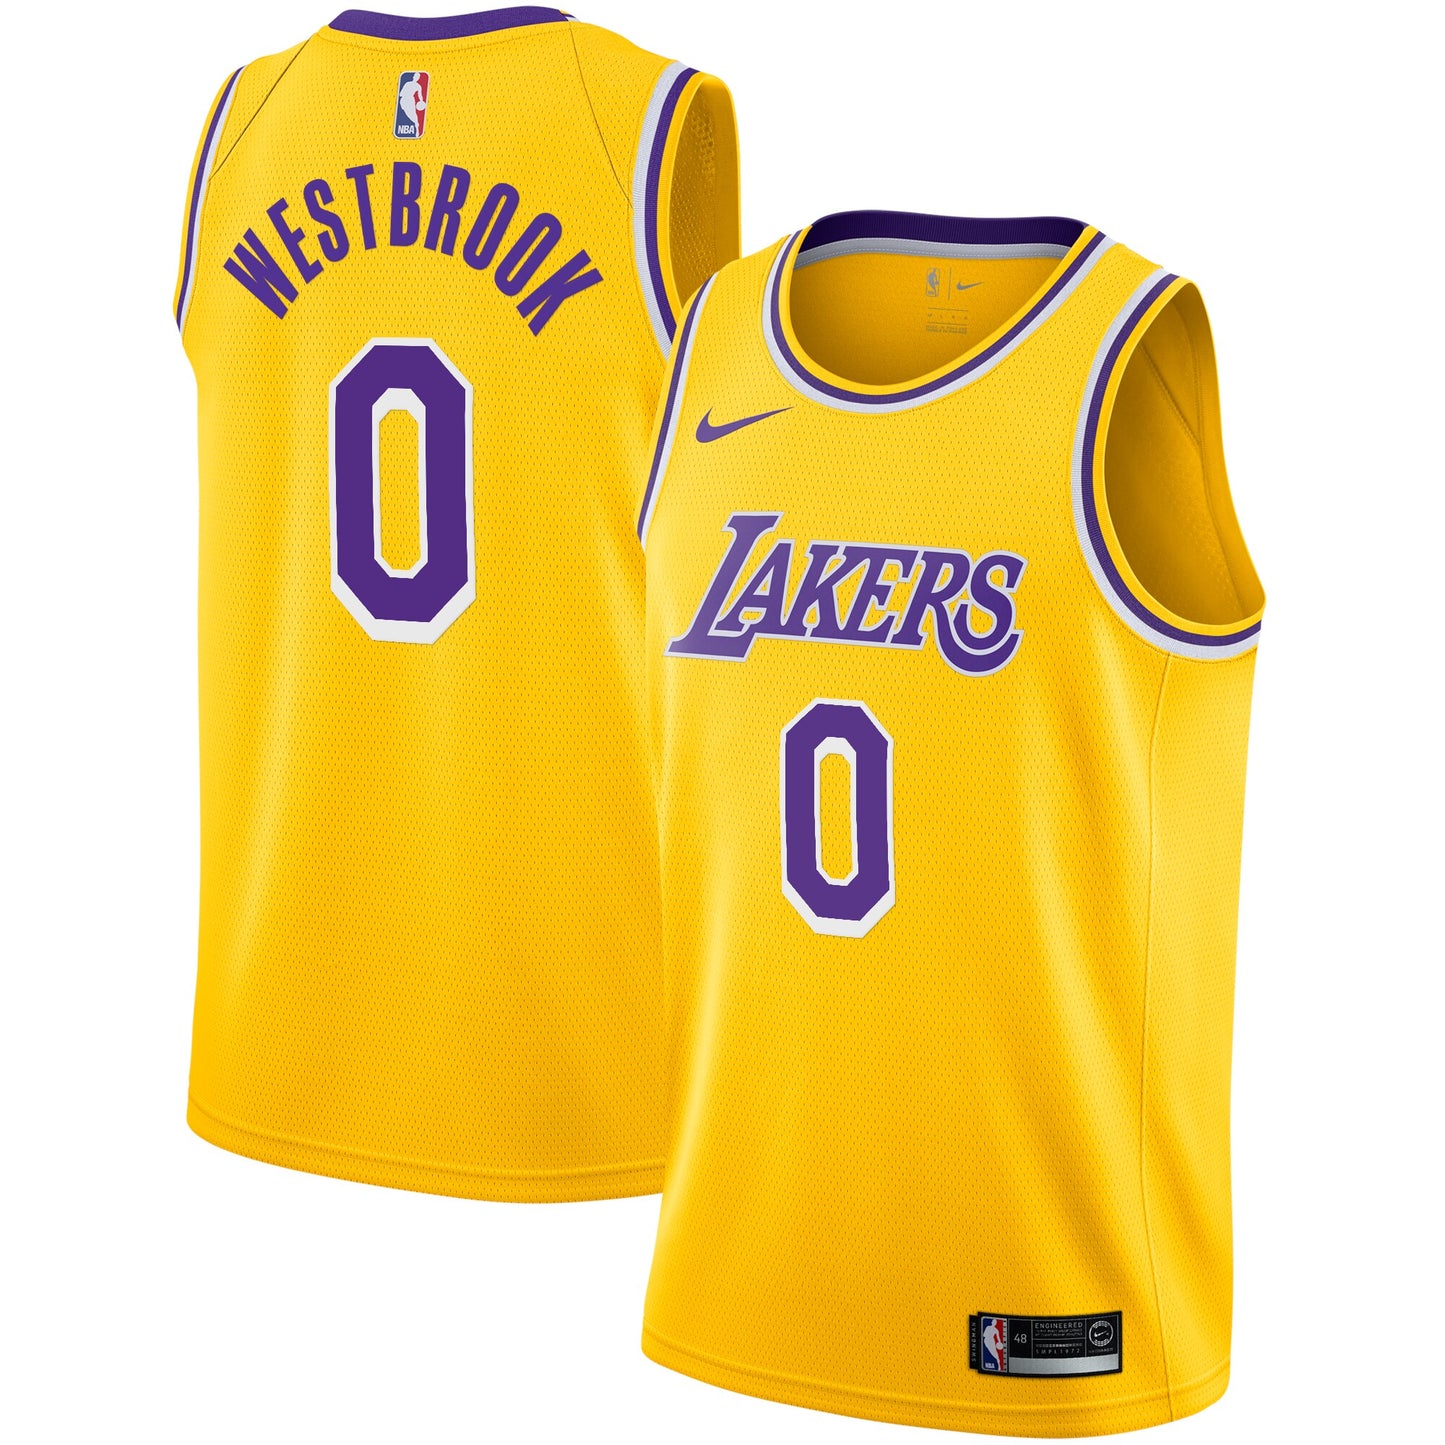 Russell Westbrook Los Angeles Lakers Nike 2020/21 Swingman Player Jersey Gold - Icon Edition